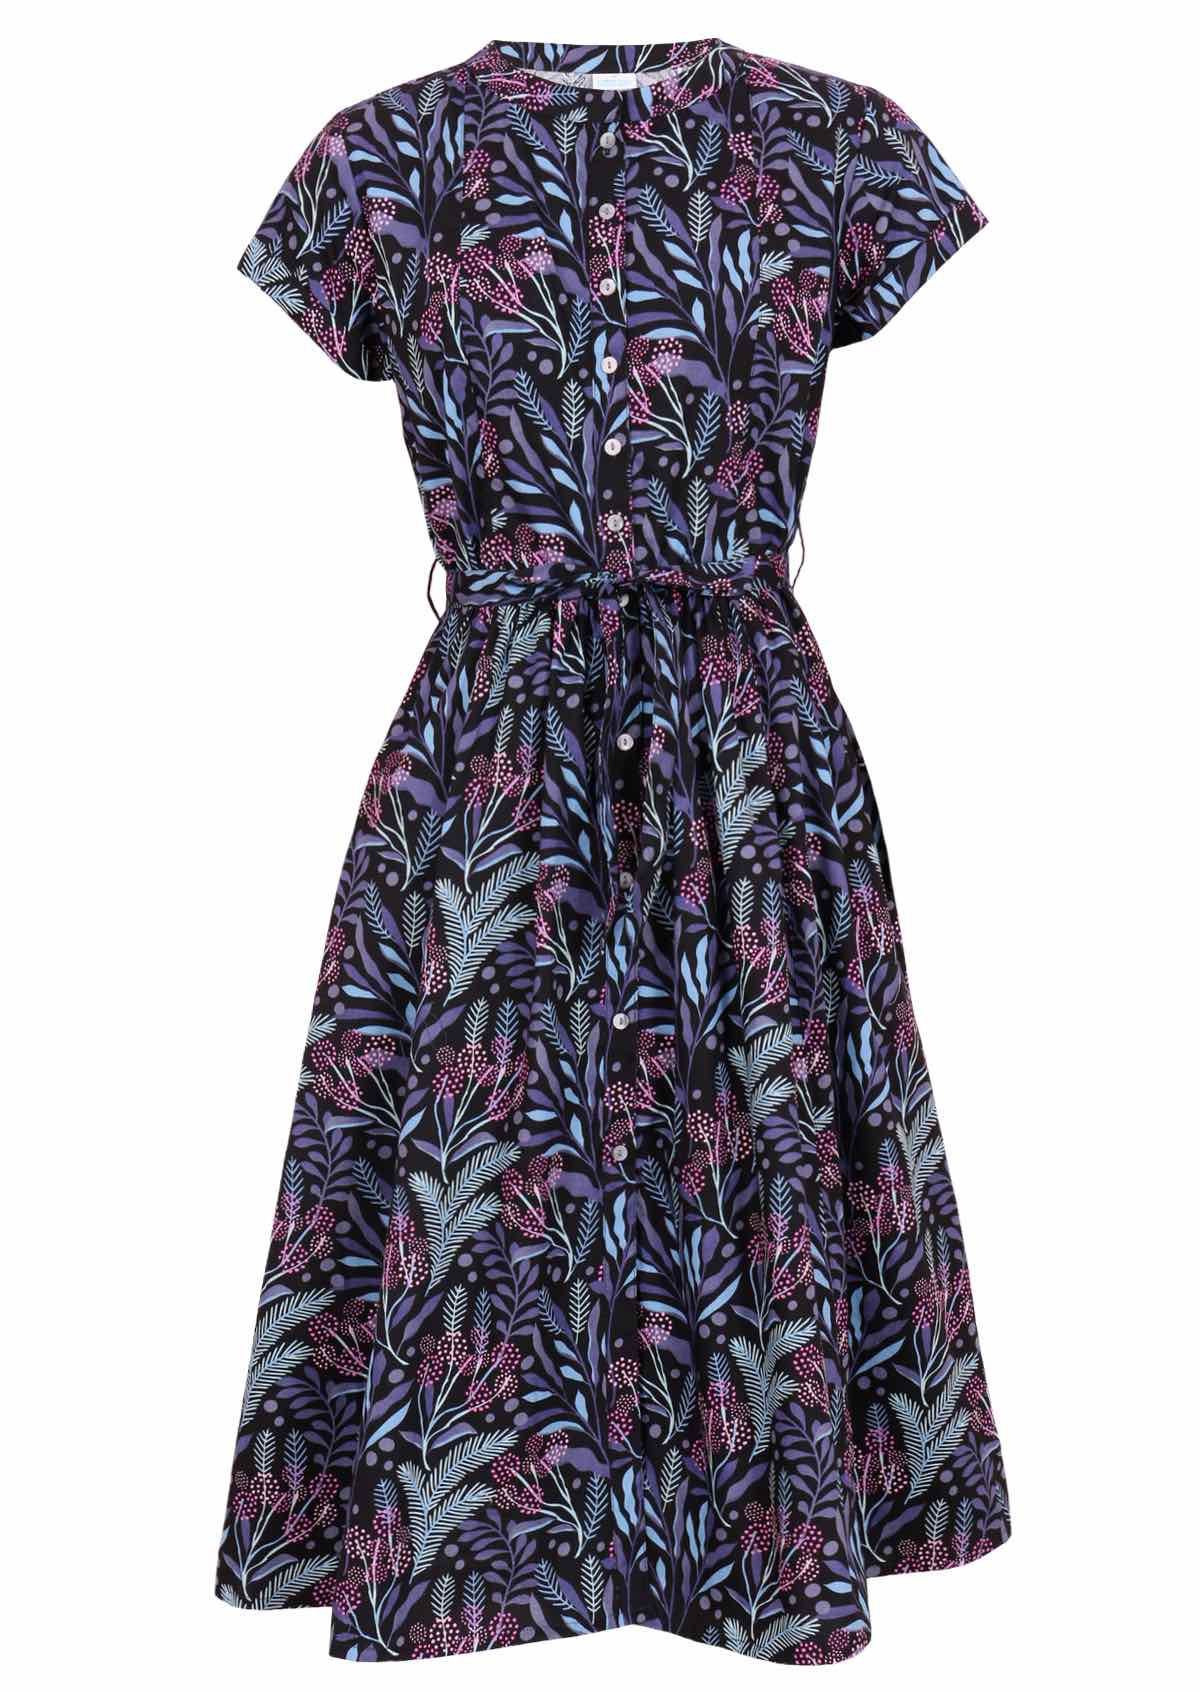 Cotton retro dress with cap sleeves and waist tie